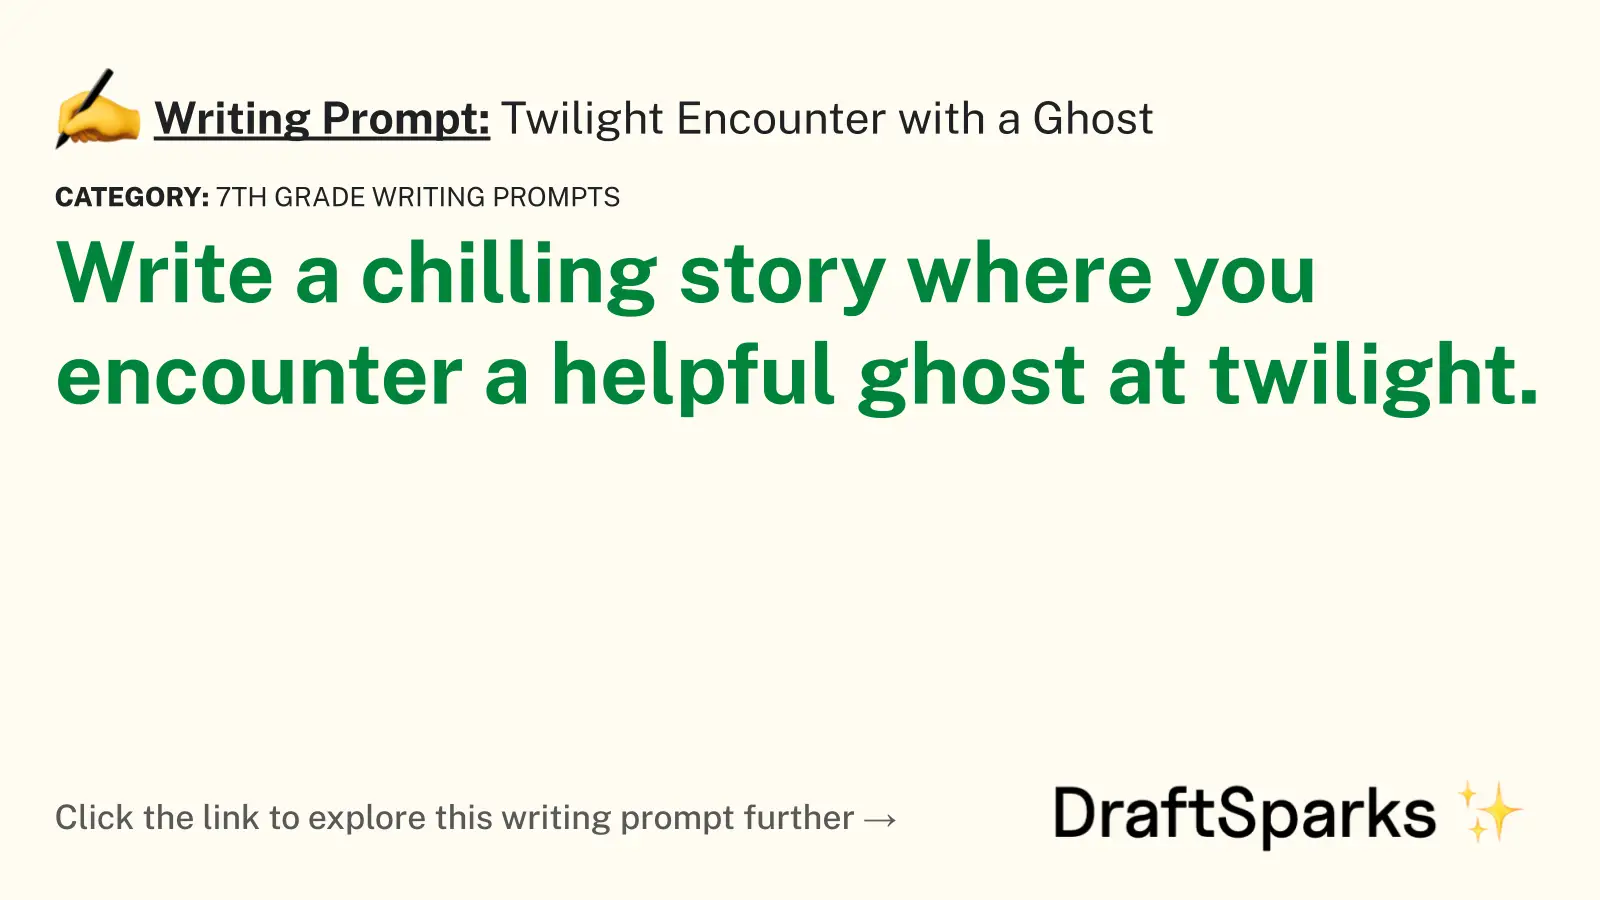 Twilight Encounter with a Ghost